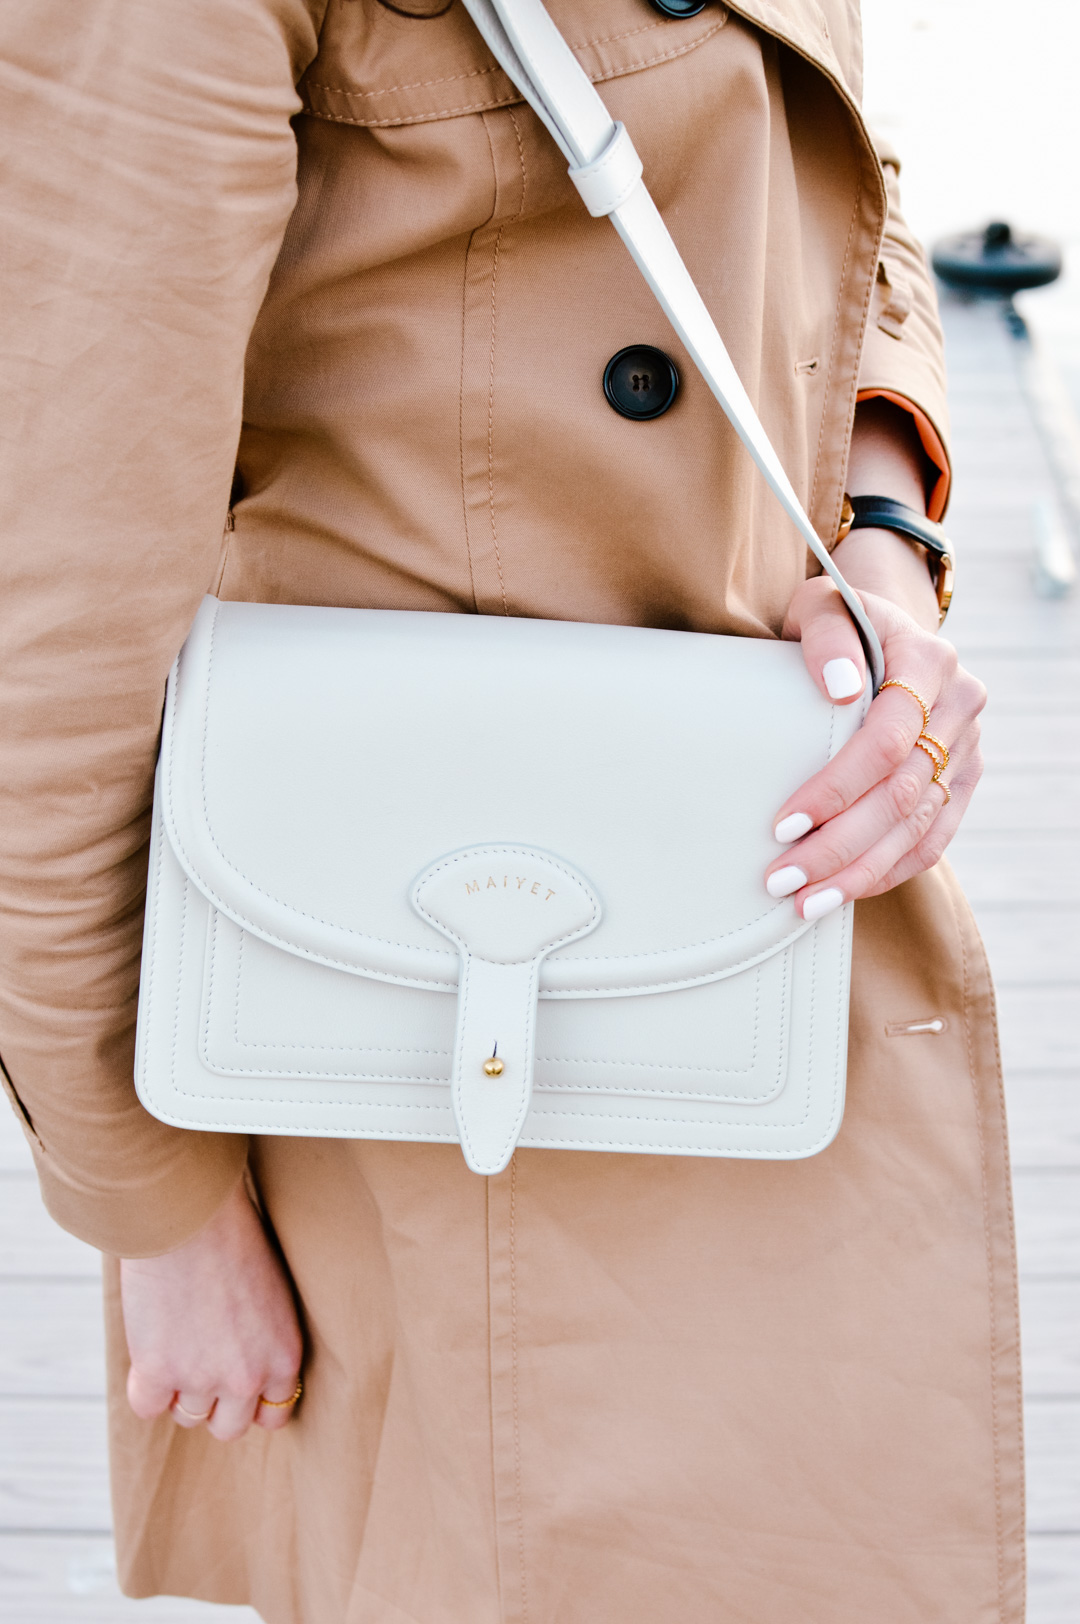 Jackie Roque styling a Maiyet white satchel